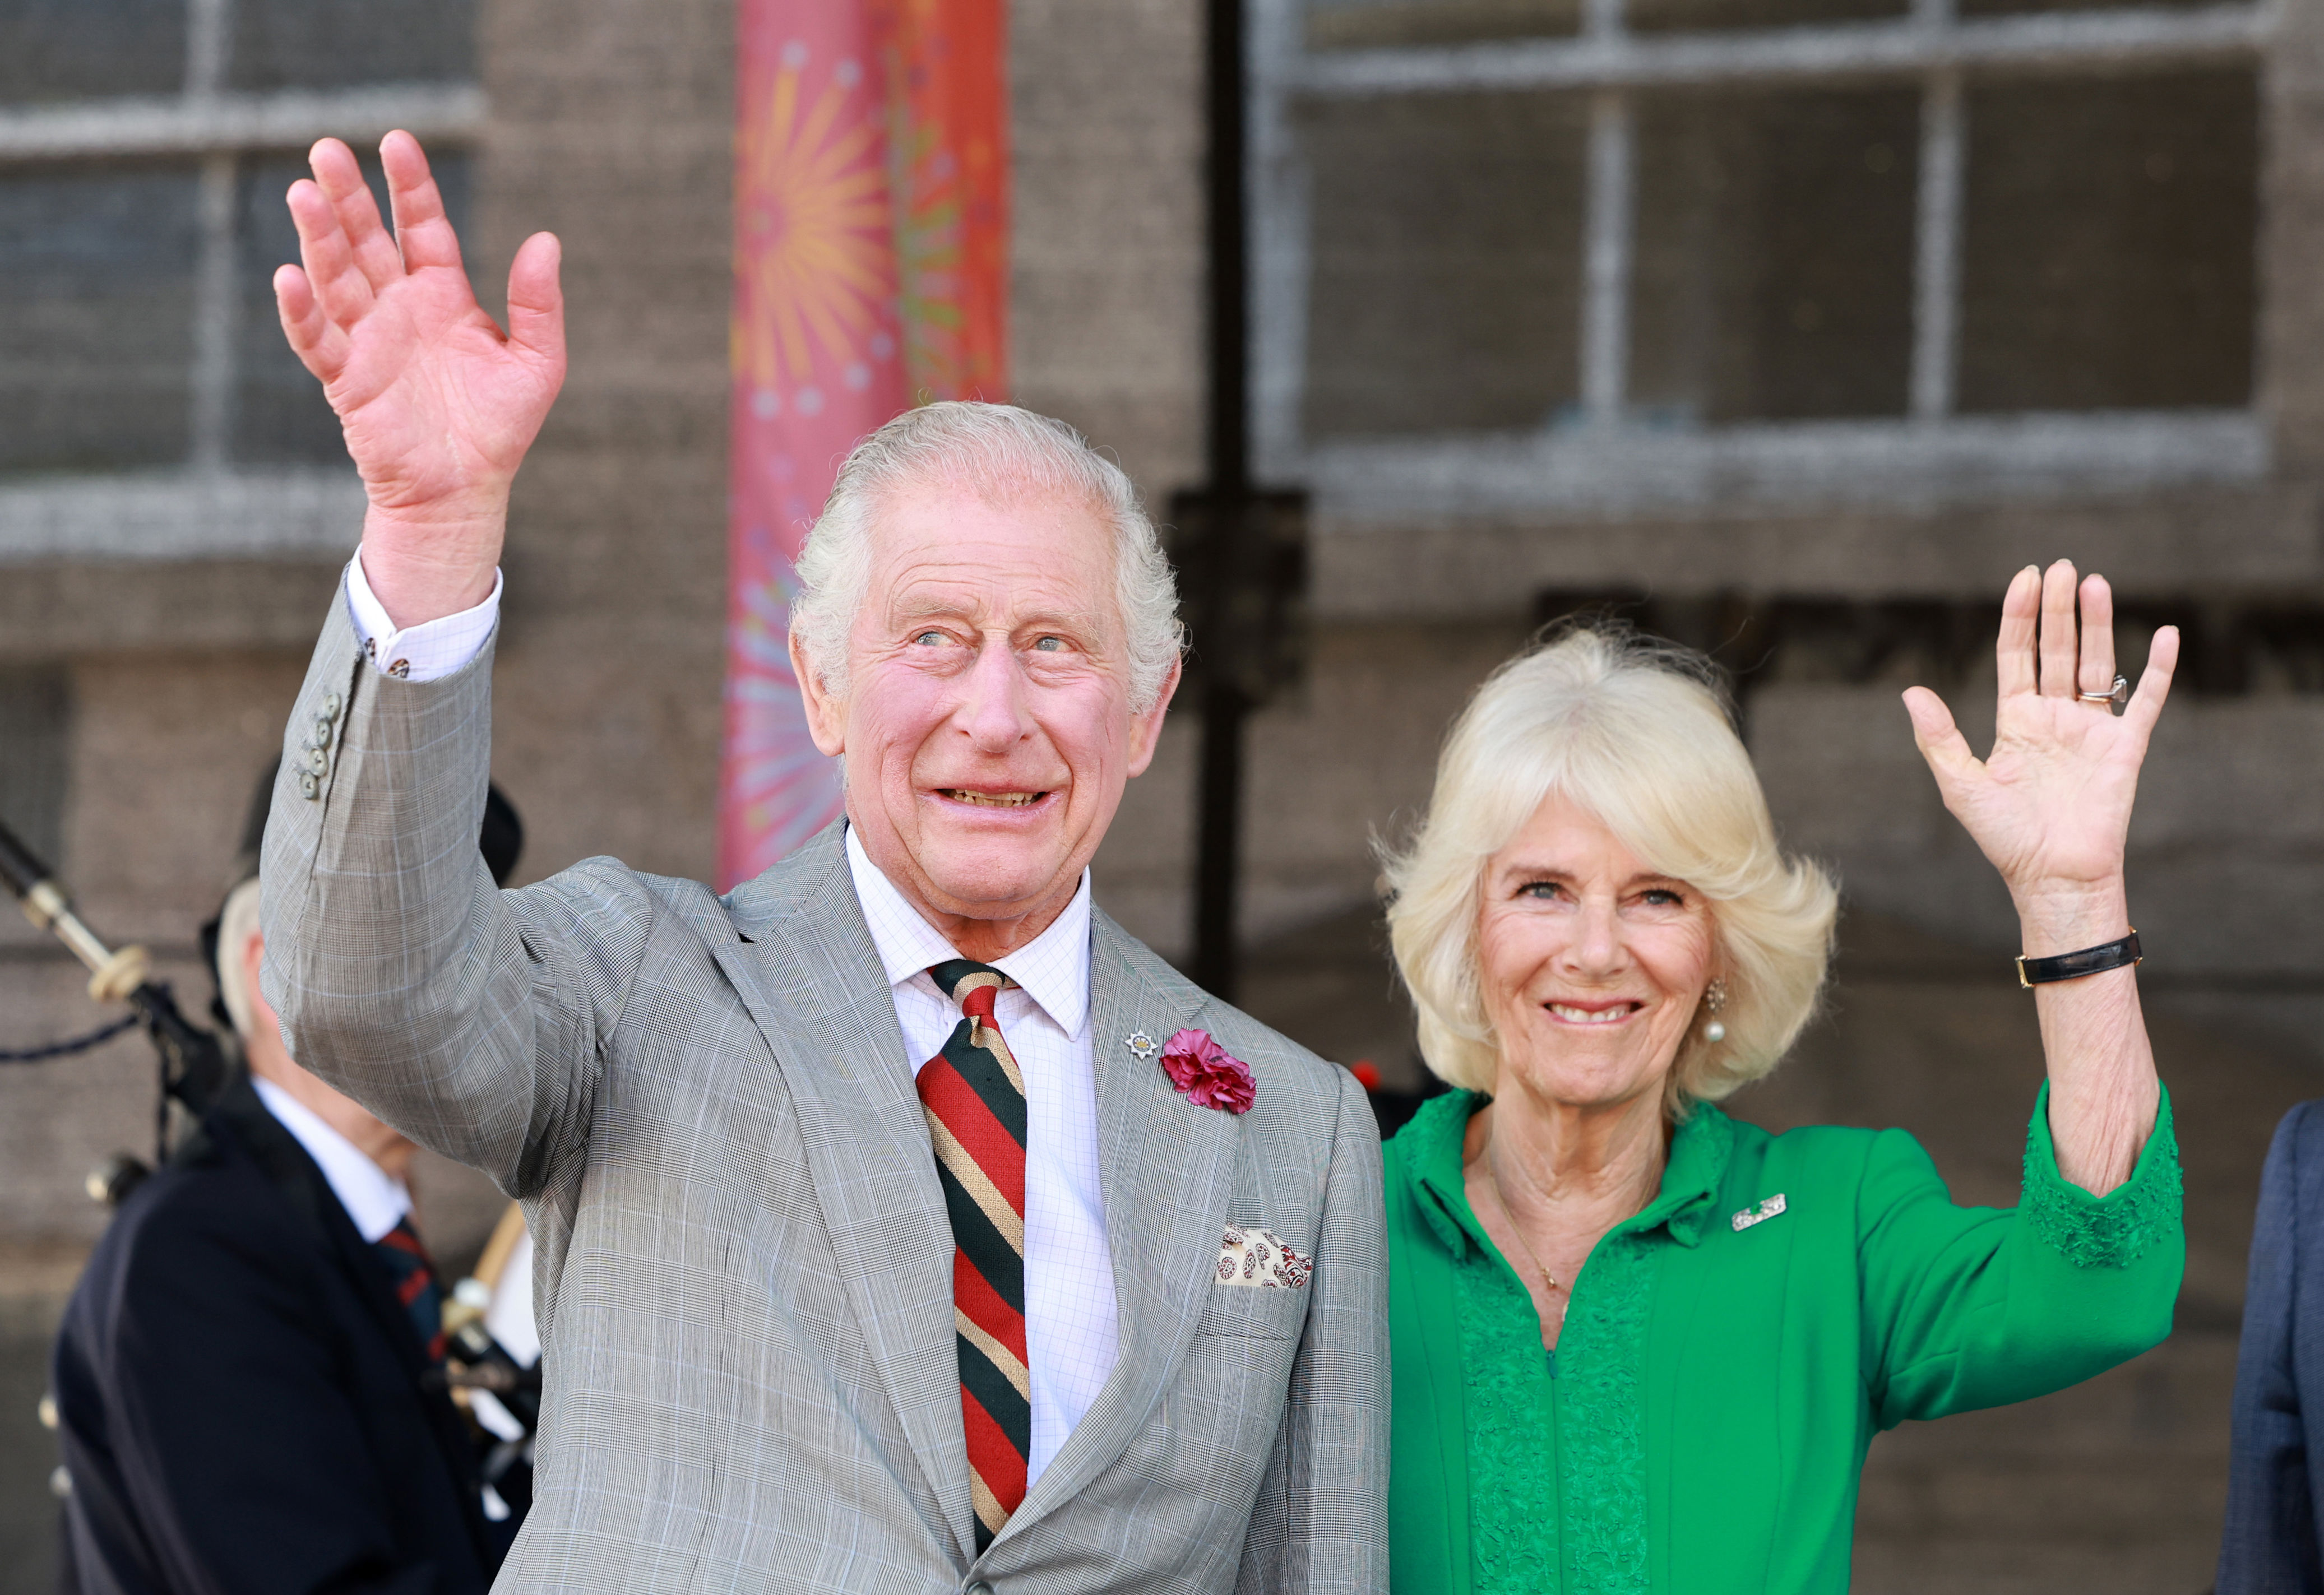 <p>King Charles III and Queen Camilla waved during a Celebration of Culture at Market Theatre Square in Armagh, Northern Ireland, on May 25, 2023, during their first trip to the British nation since their <a href="https://www.wonderwall.com/celebrity/the-coronation-of-king-charles-iii-and-queen-camilla-the-best-pictures-of-all-the-royals-at-this-historic-event-735015.gallery">coronation</a>.</p>